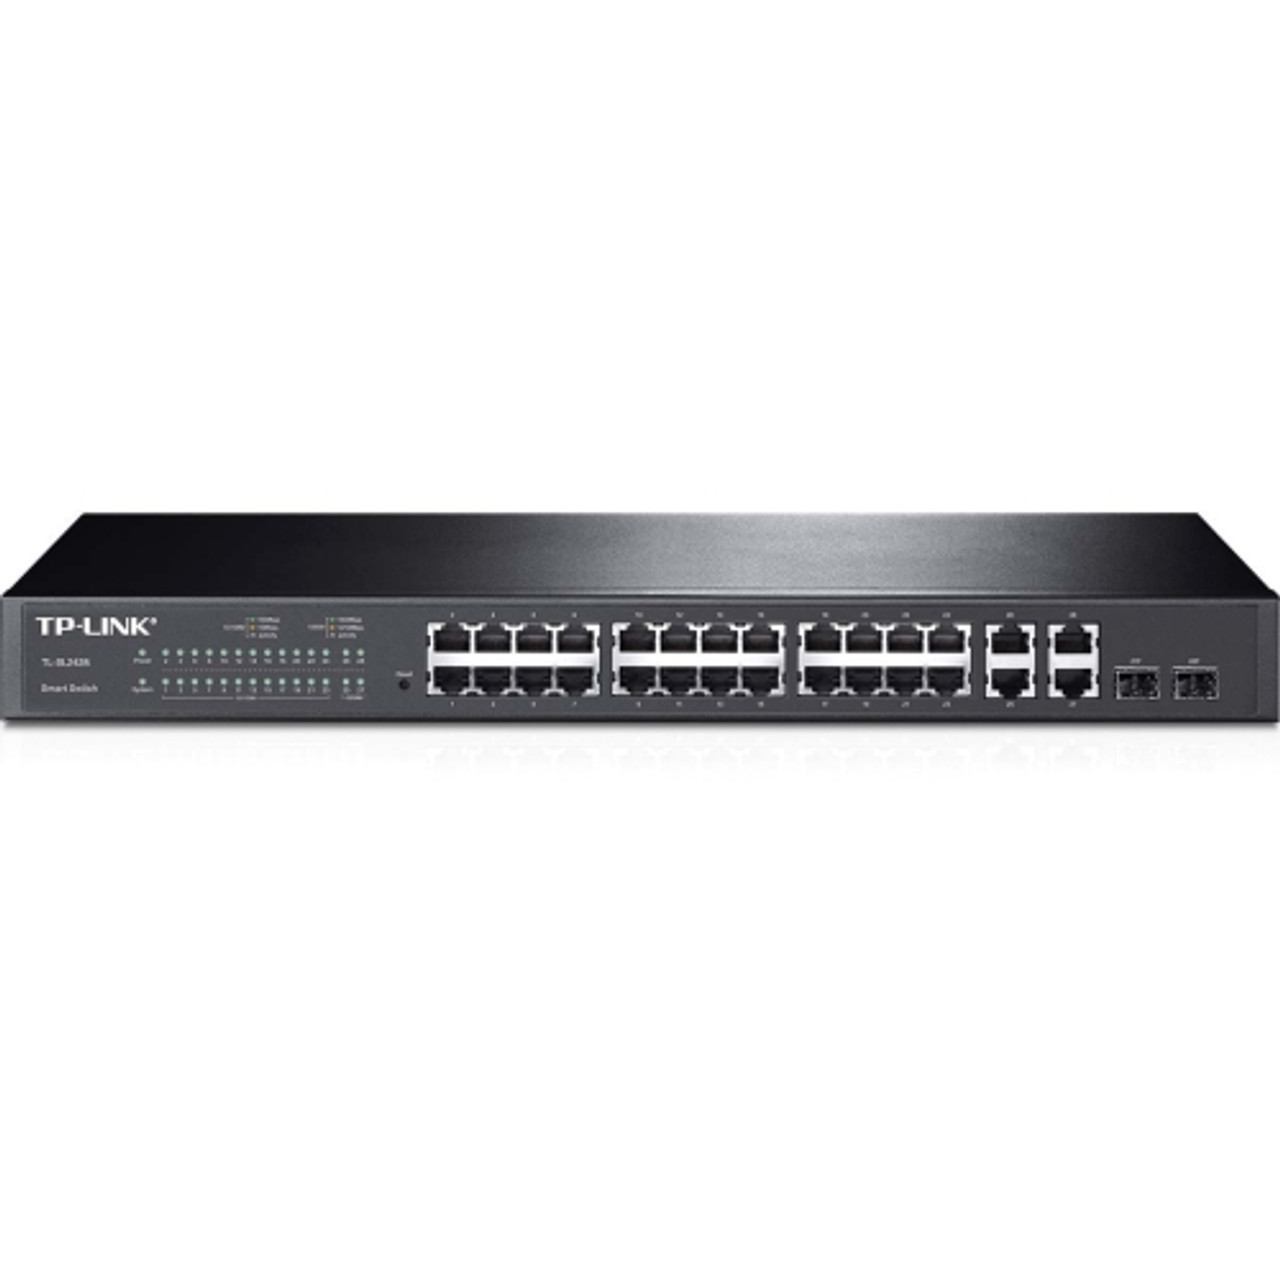 TL-SL2428 TP-LINK 28-Ports Smart Switch with 2 Combo SFP Slots 24 10/100Mbps Ports and 4 Gigabit Ports (Refurbished)